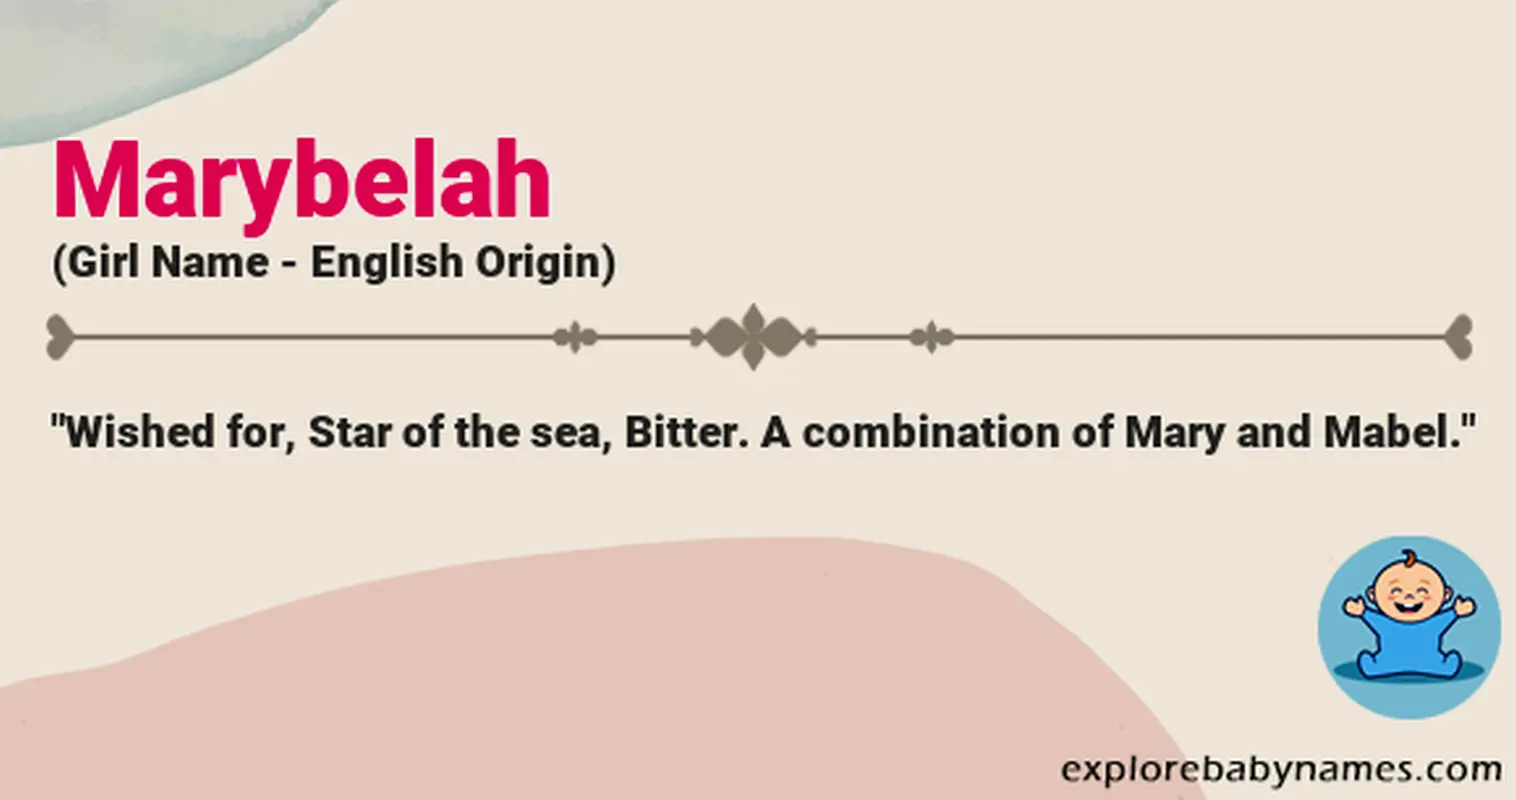 Meaning of Marybelah